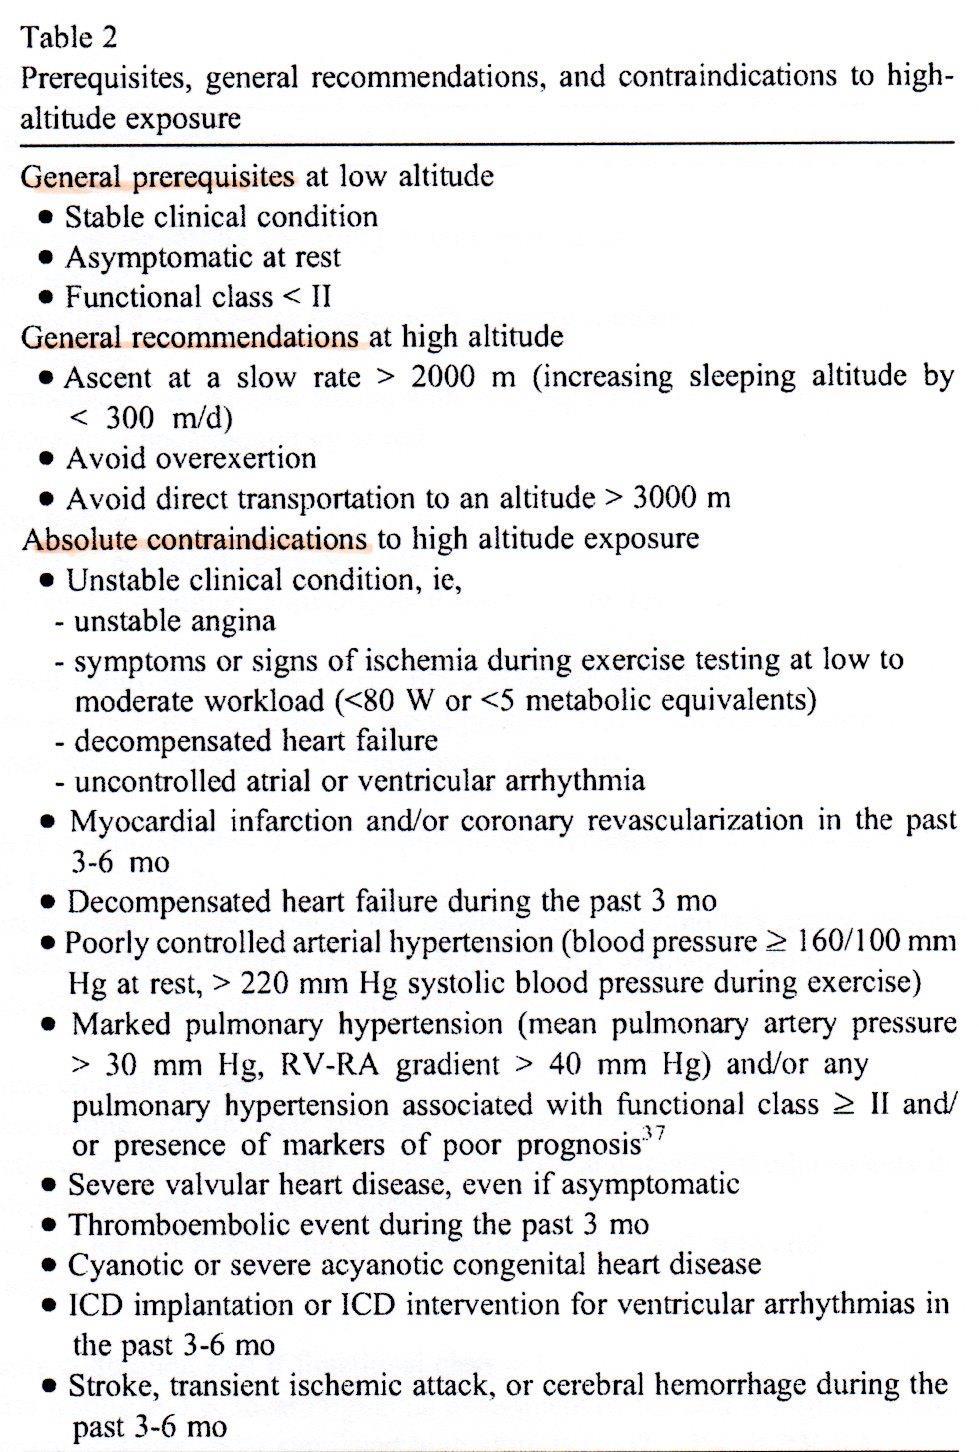 High-Altitude Exposure in Patients with Cardiovascular Disease: Risk Assessment and Practical Recommendations Yves Alleman et al: Prog Cardiovasc Dis 2010;52:512-524 Base on available data,